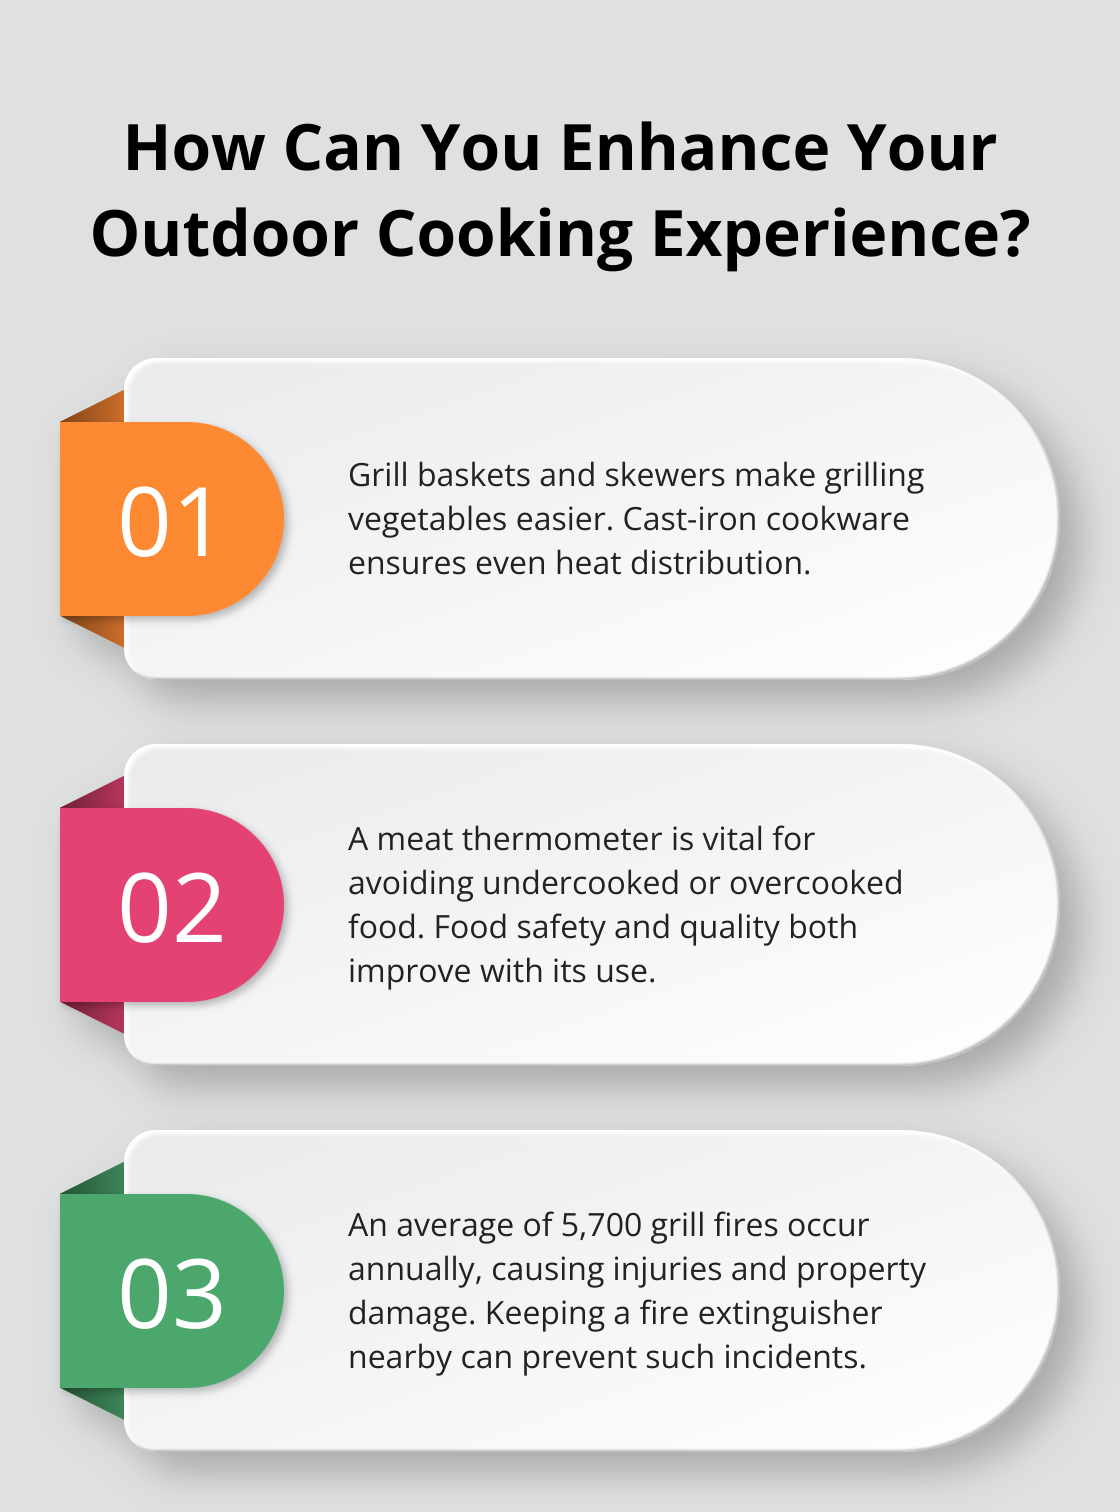 Fact - How Can You Enhance Your Outdoor Cooking Experience?